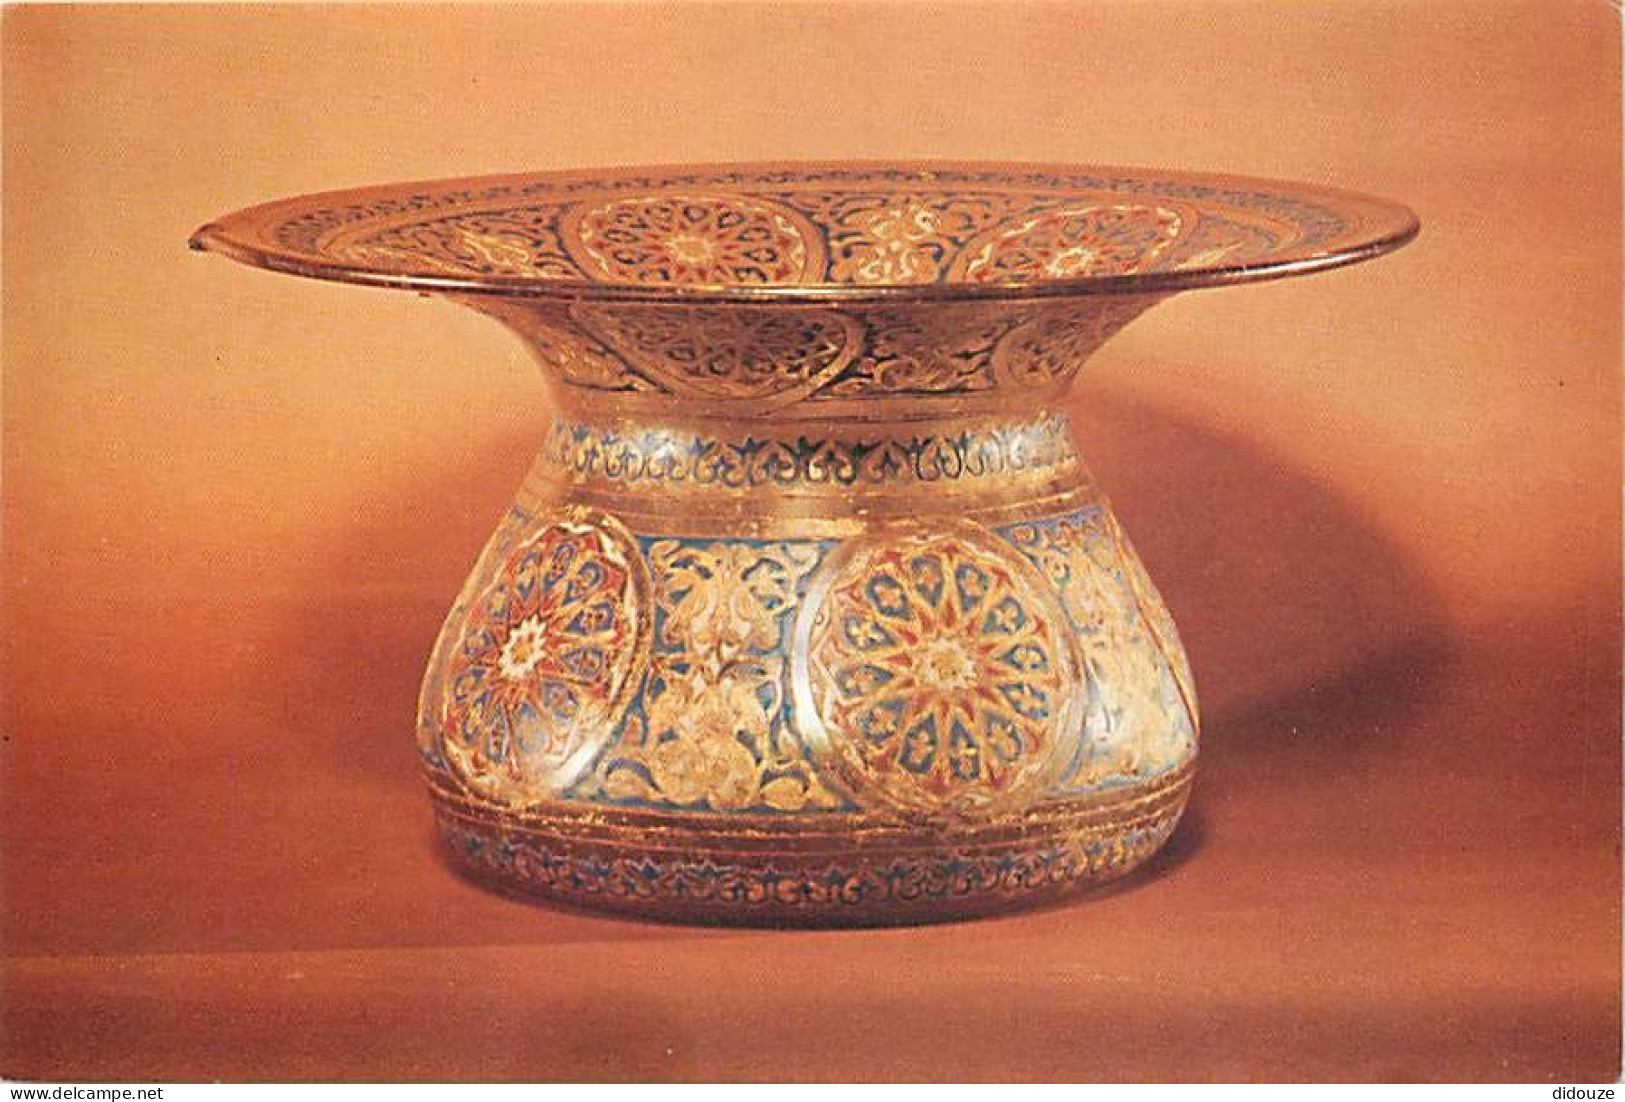 Art - Vase Of Gilded And Enamelled Glass - Syria,Mamlukperiod 14th Century - Cleveland Muséum Of Art, Purchase From The  - Articles Of Virtu